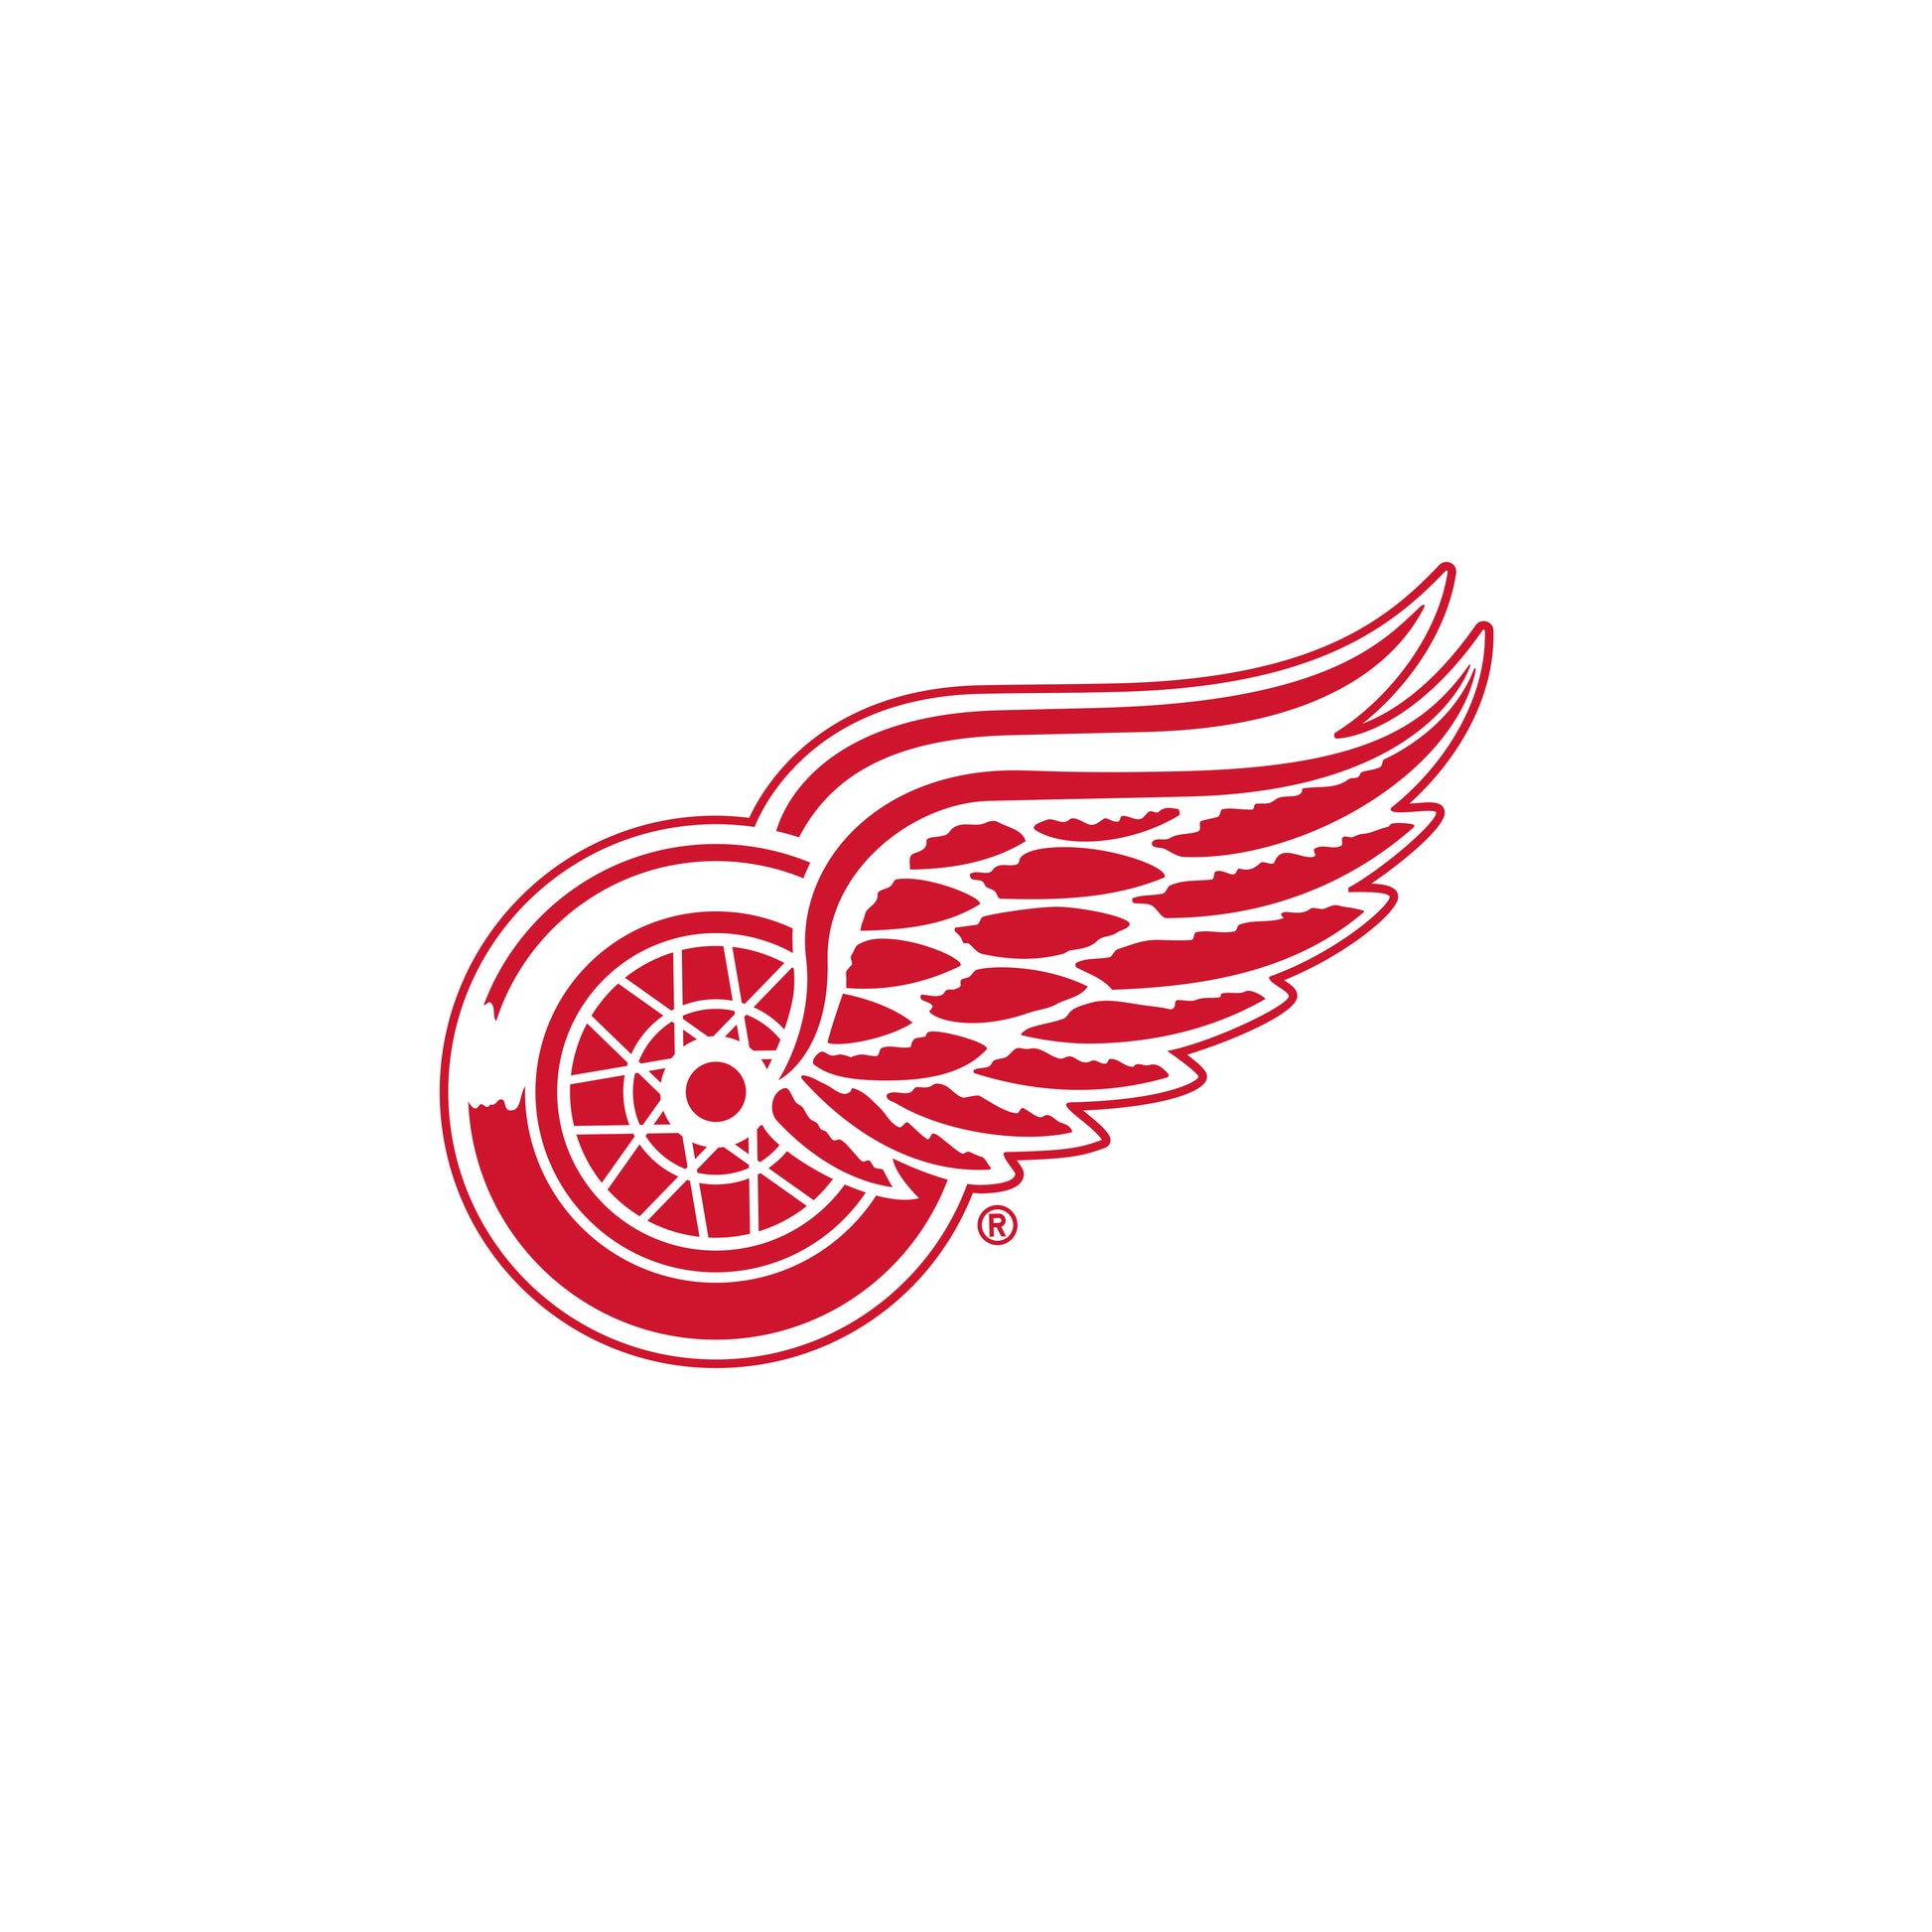 Detroit Red Wings Gifts & Merchandise for Sale